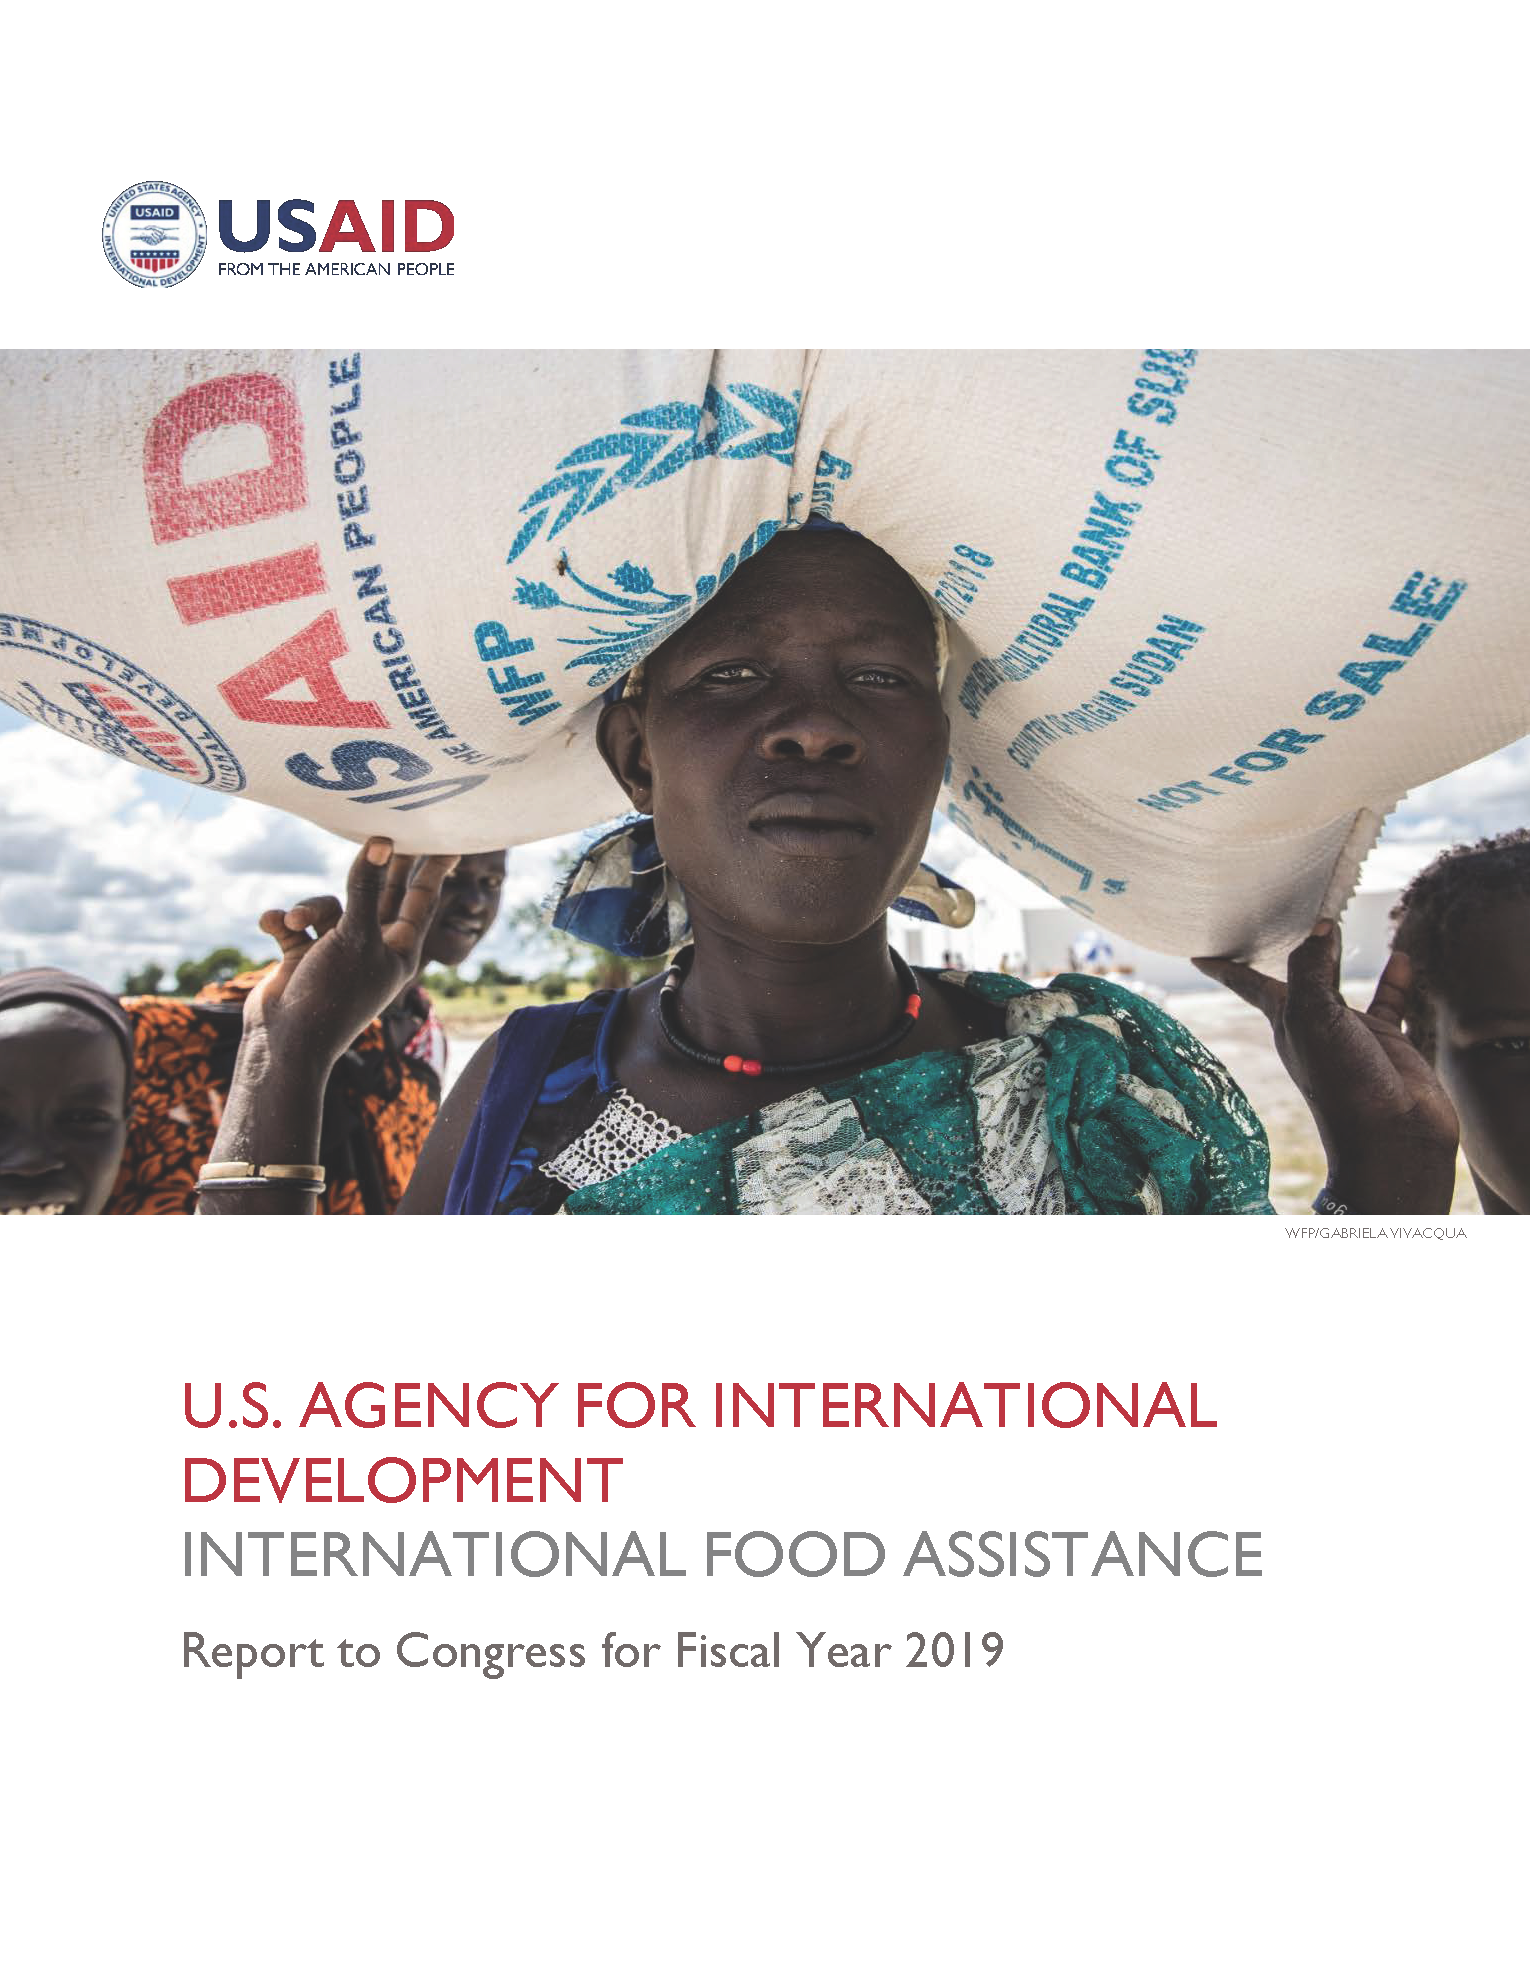 USAID International Food Assistance Report, FY 2019